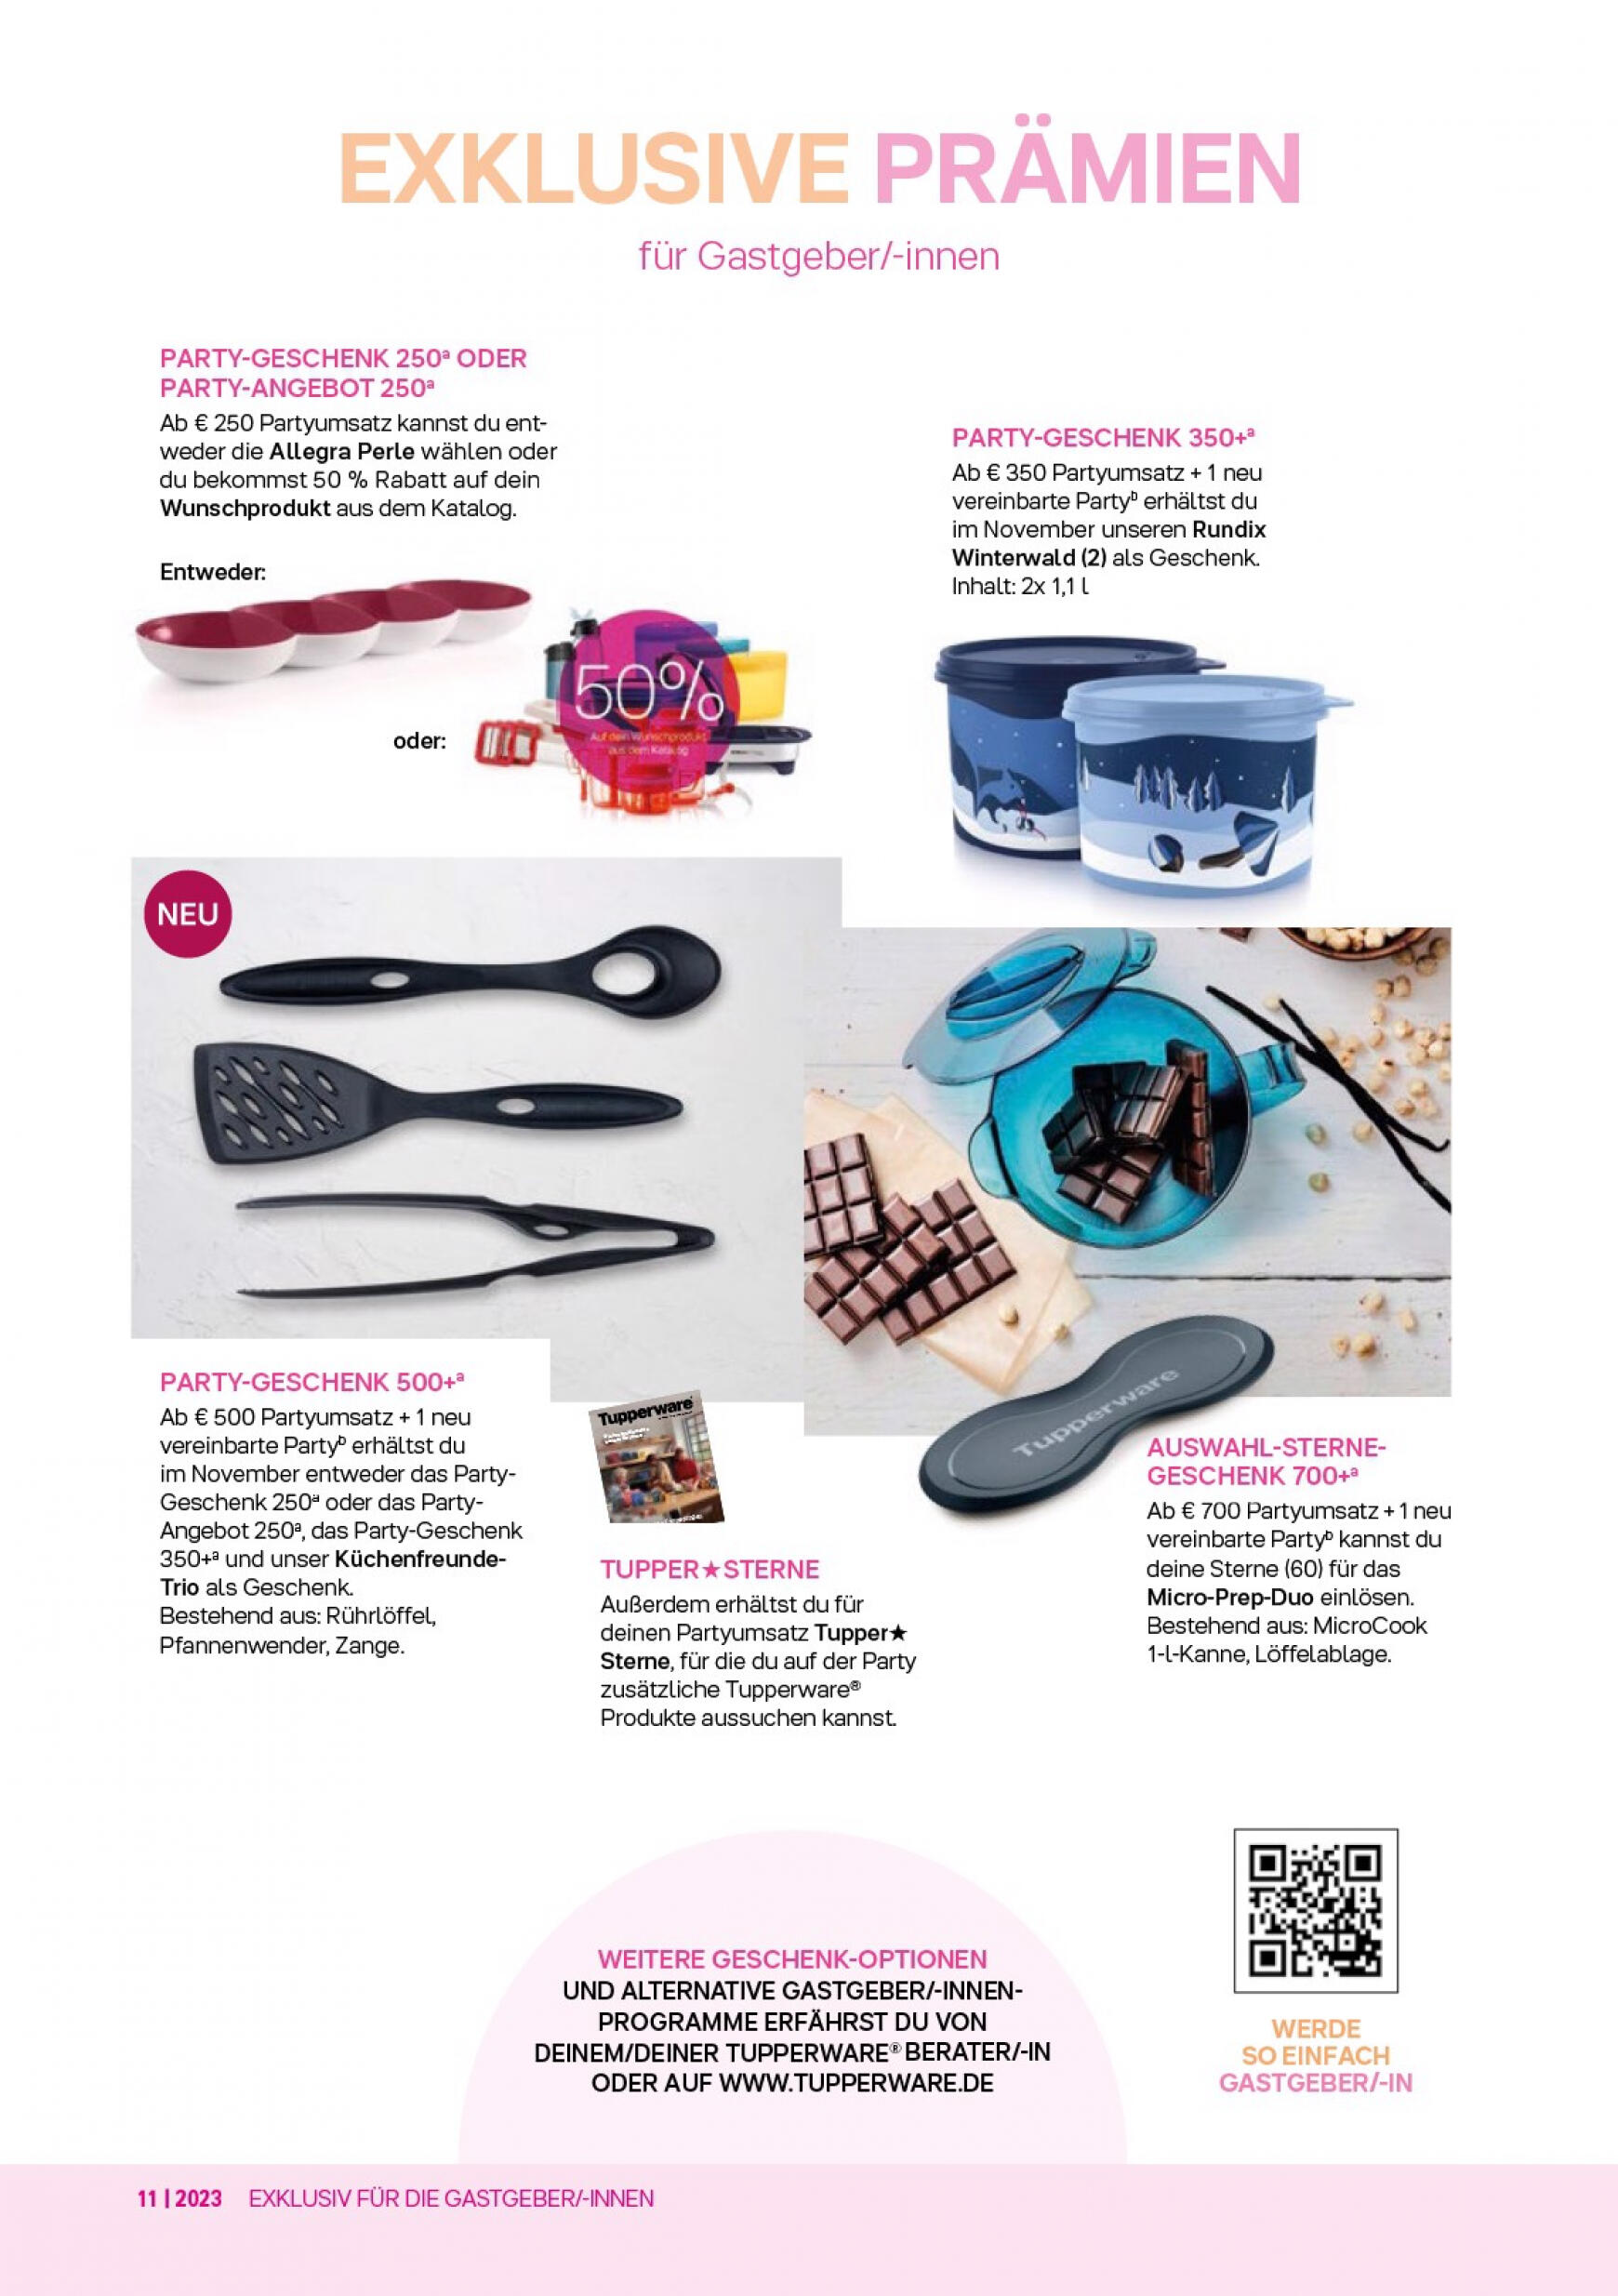 tupperware - Tupperware Online & Party - page: 10